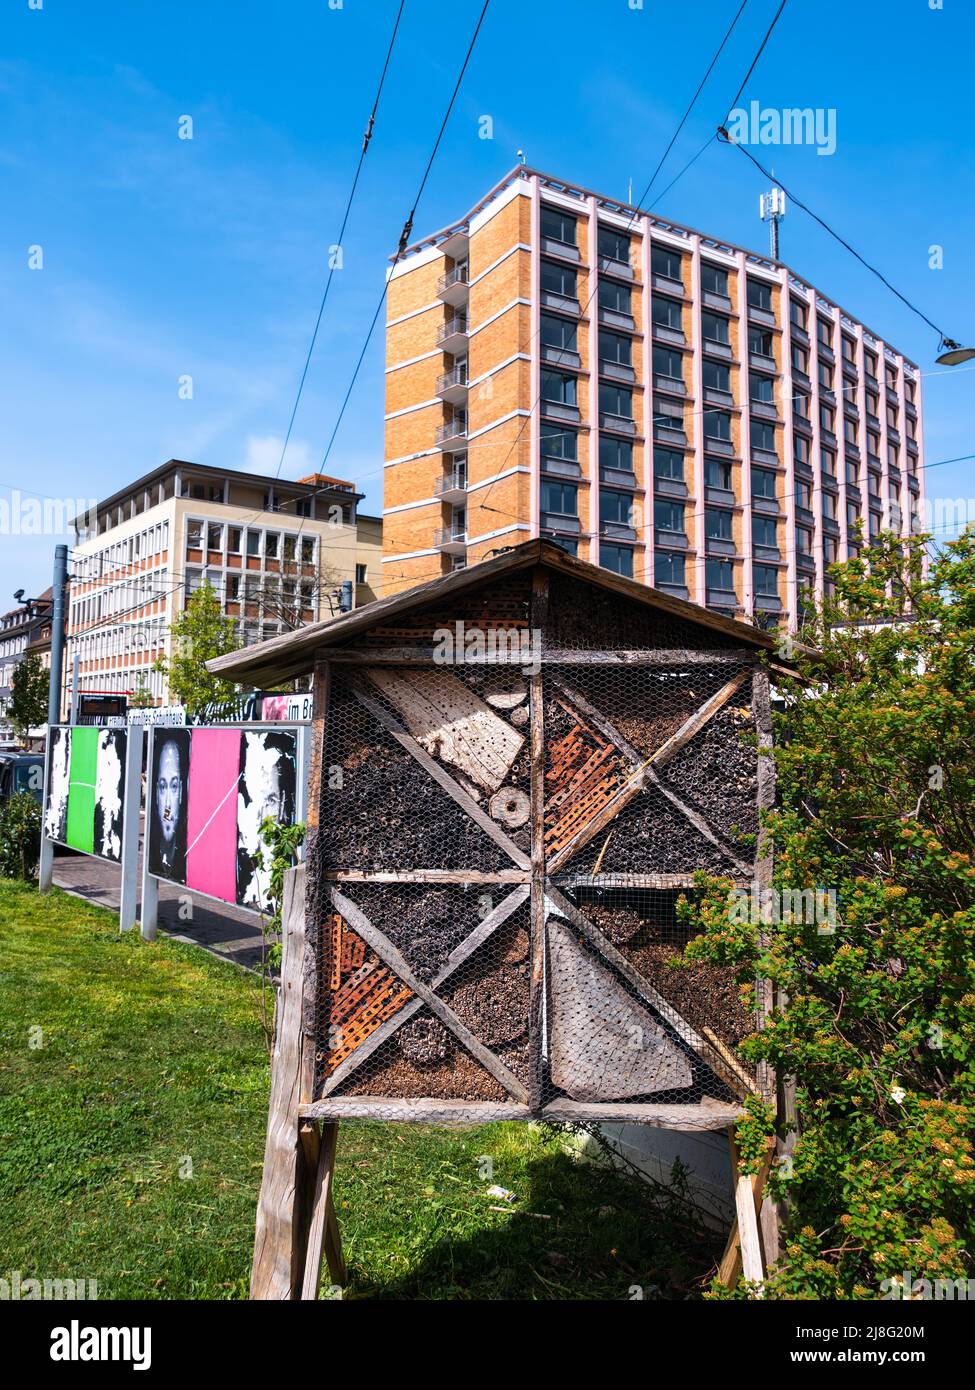 Freiburg im Breisgau, Germany - April 13, 2022: An insect hotel in the city of Freiburg im Breisgau. Insect or a bug hotel provides shelter for insect Stock Photo